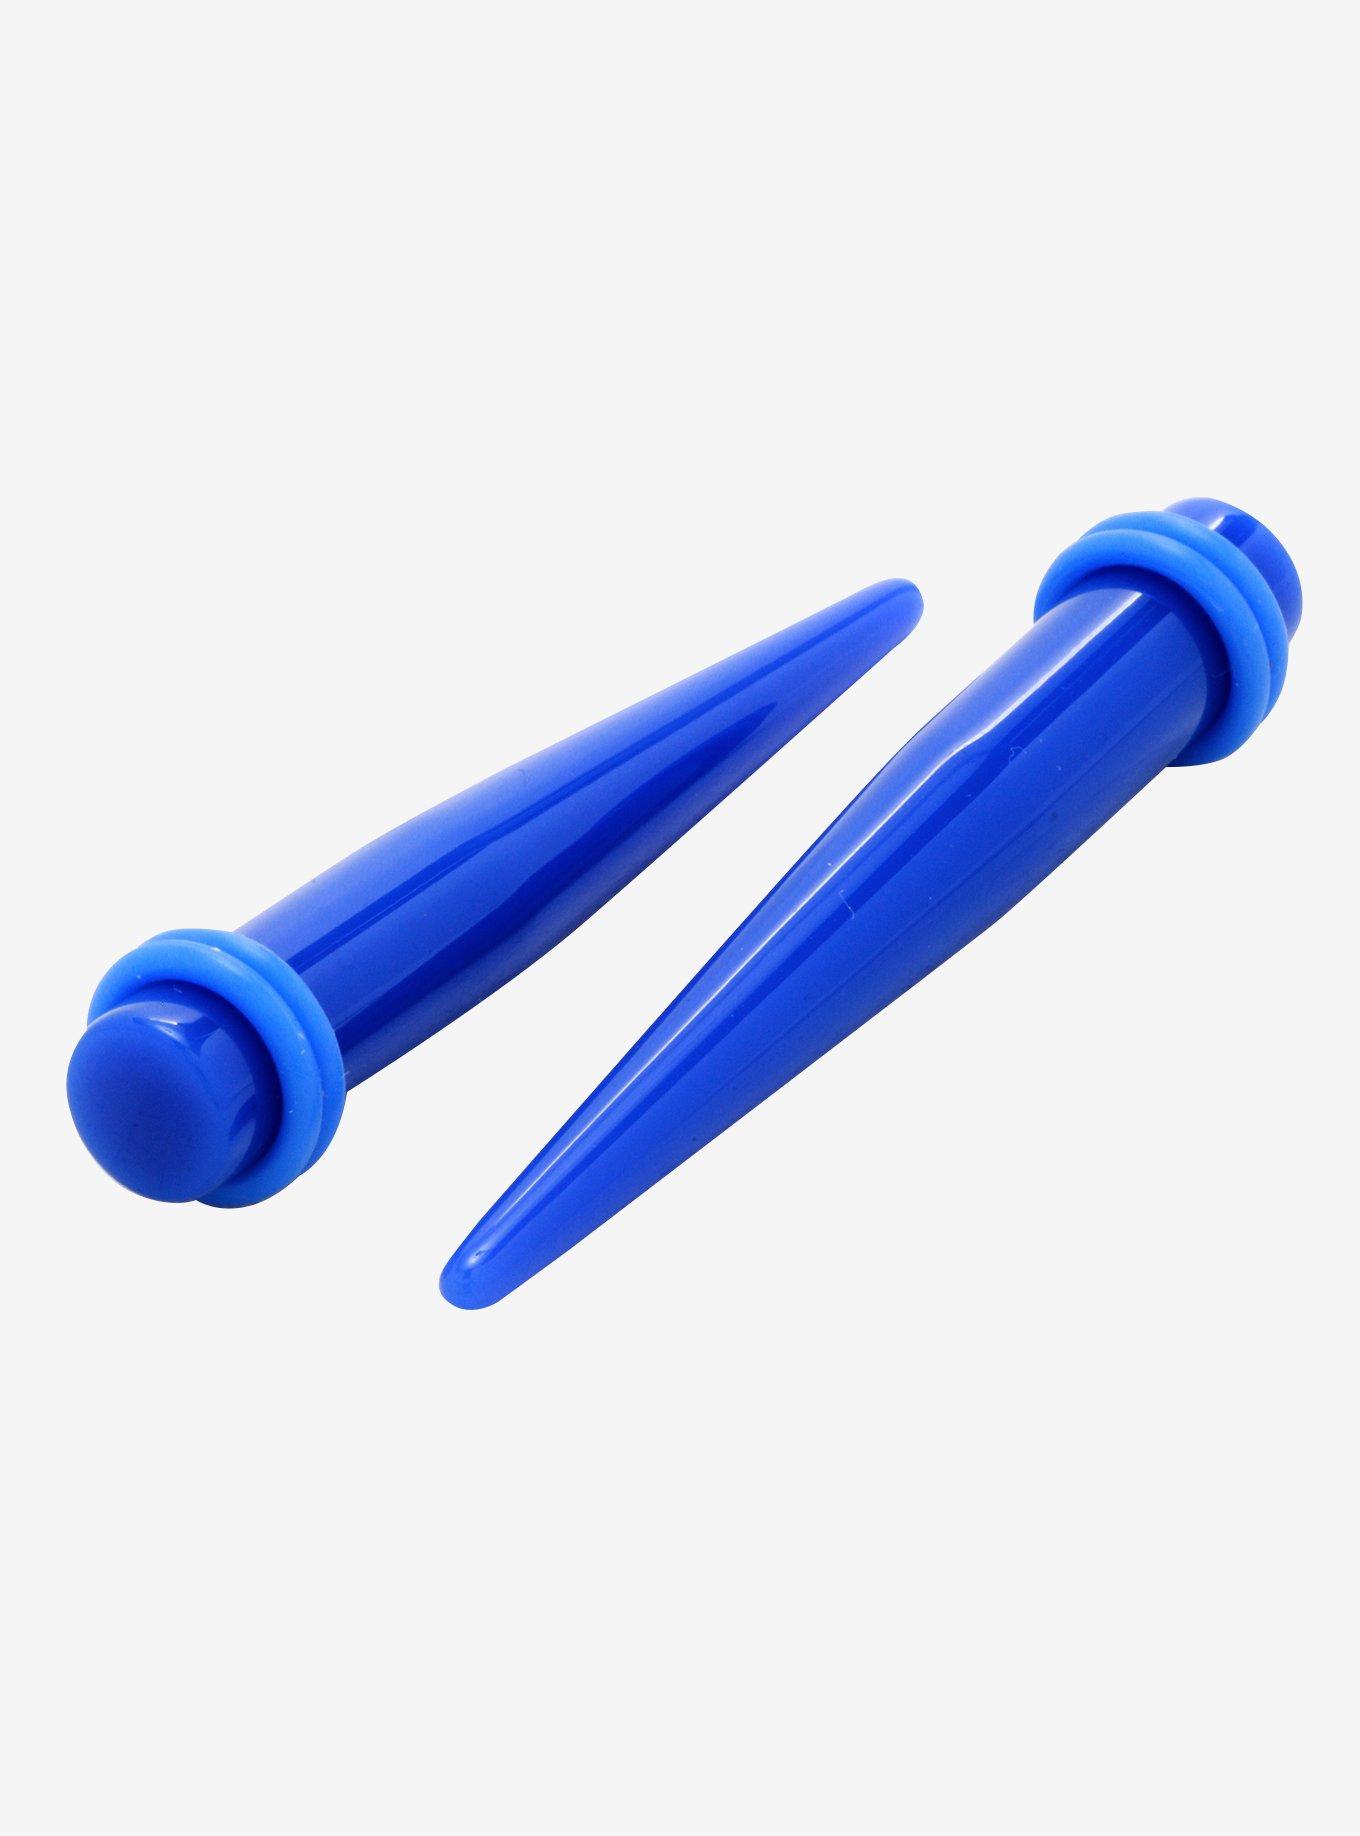 Acrylic Neon Blue Taper 2 Pack, BLUE, hi-res